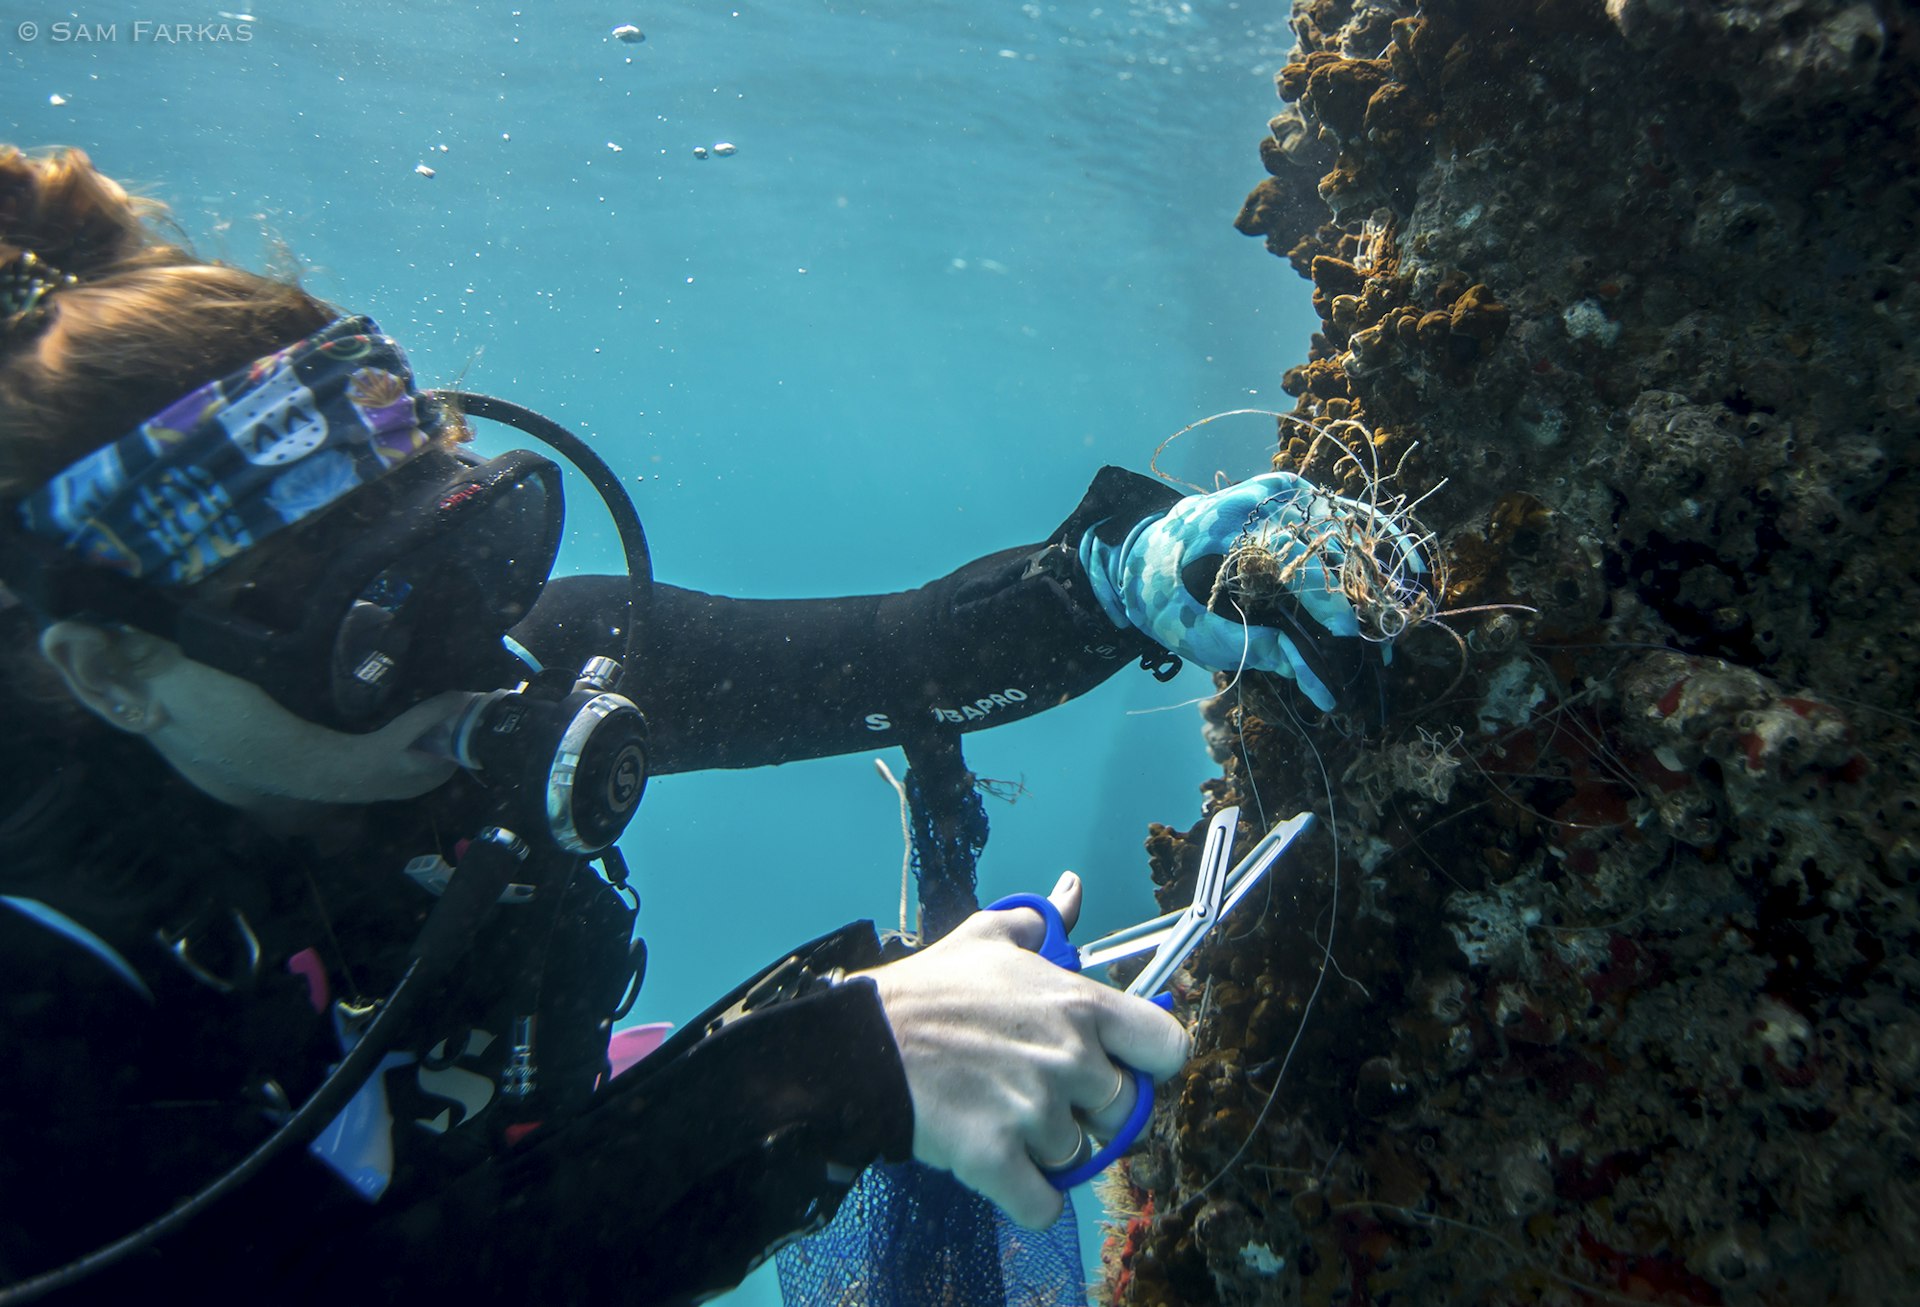 The Loggerhead Marinelife Center's Katie O'Hara removing debris from an underwater pier